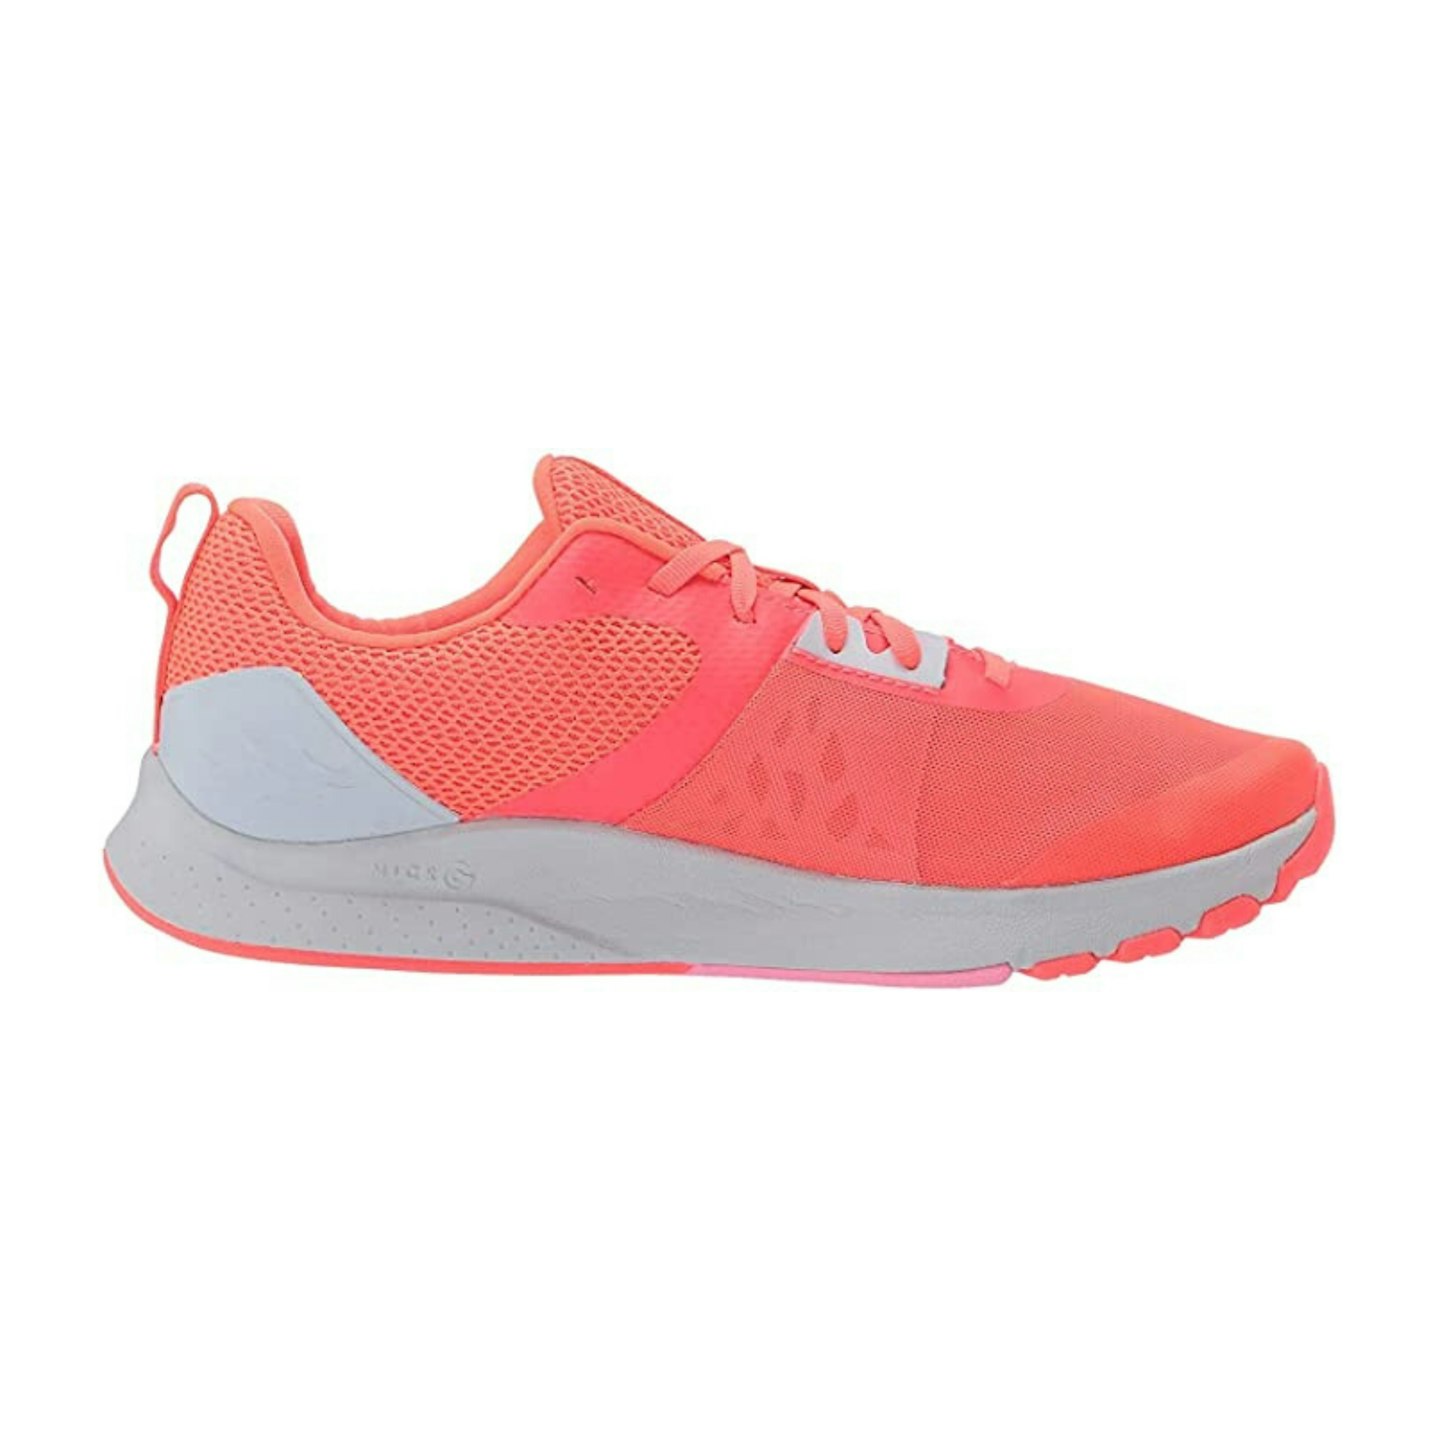 Under Armour Women's Tribase Edge Trainer Fitness Shoes